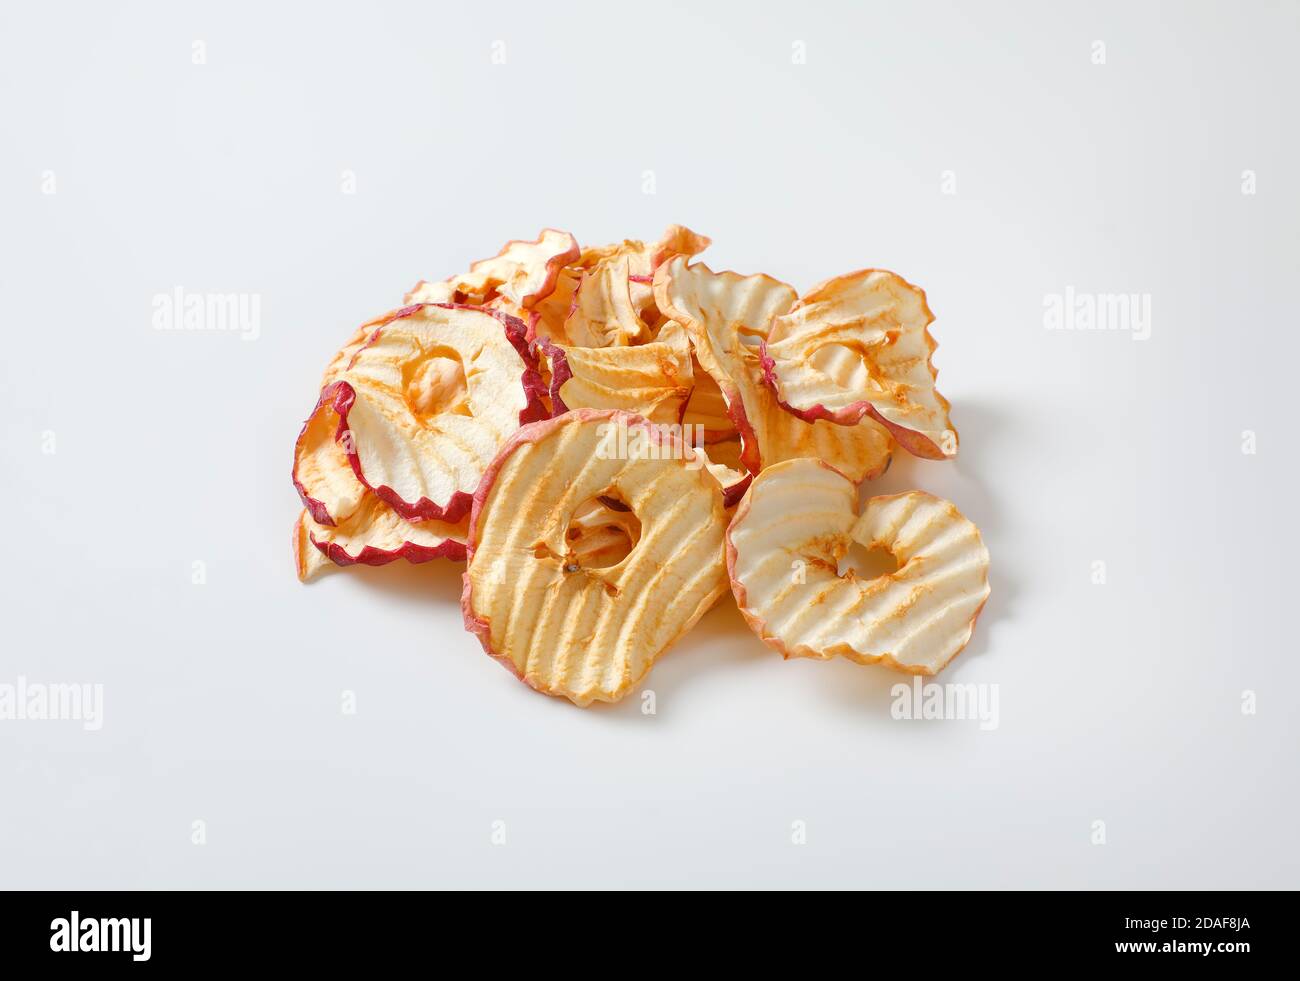 Heap of dried apple slices - apple chips or rings Stock Photo